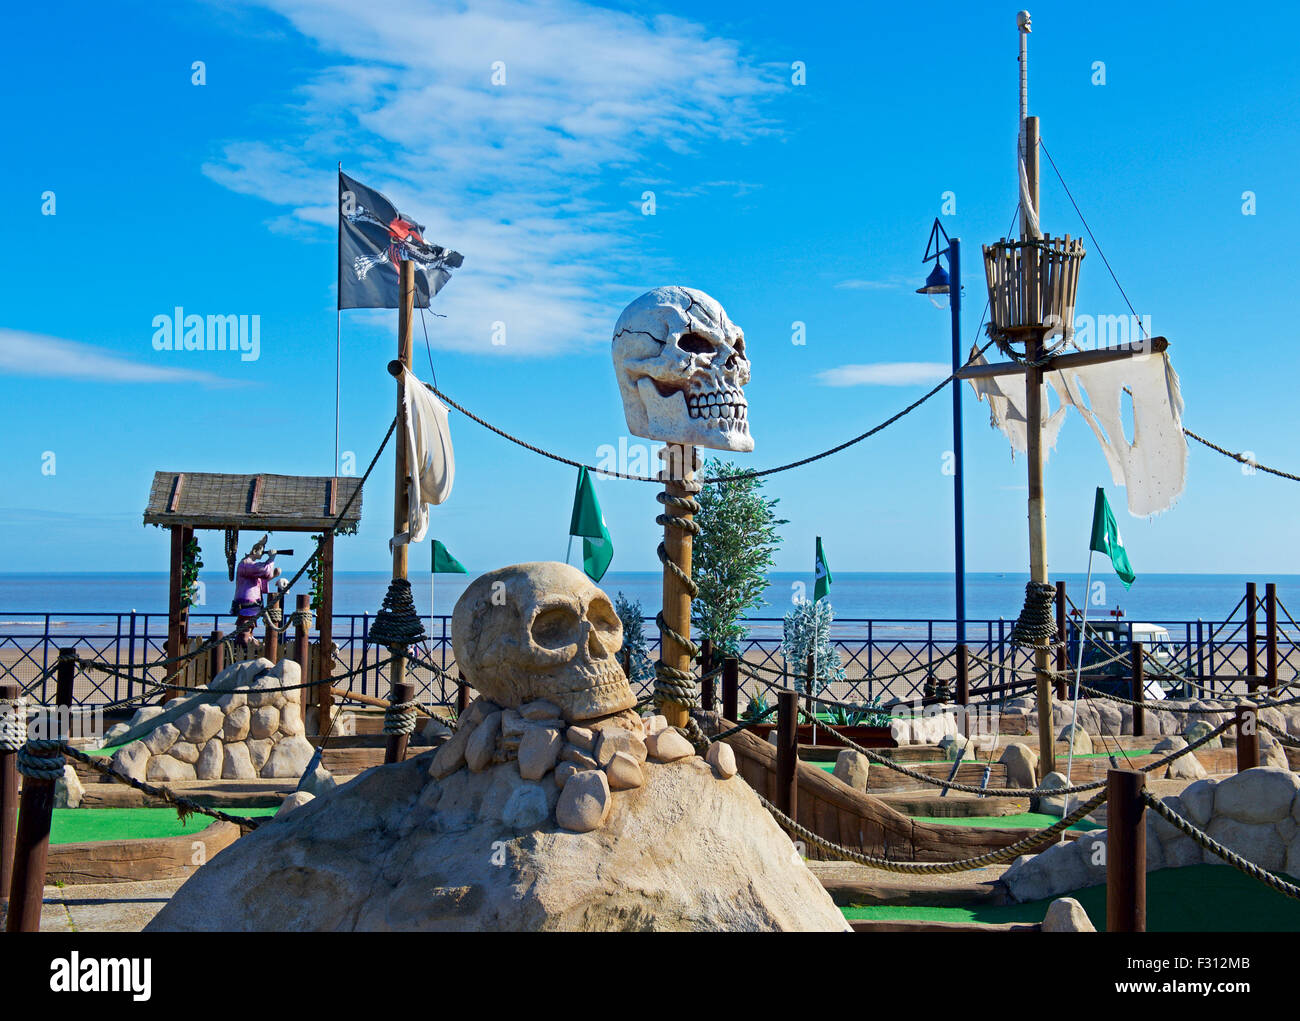 Pirate-themed crazy golf at Mabelthorpe, Lincolnshire, England UK Stock Photo